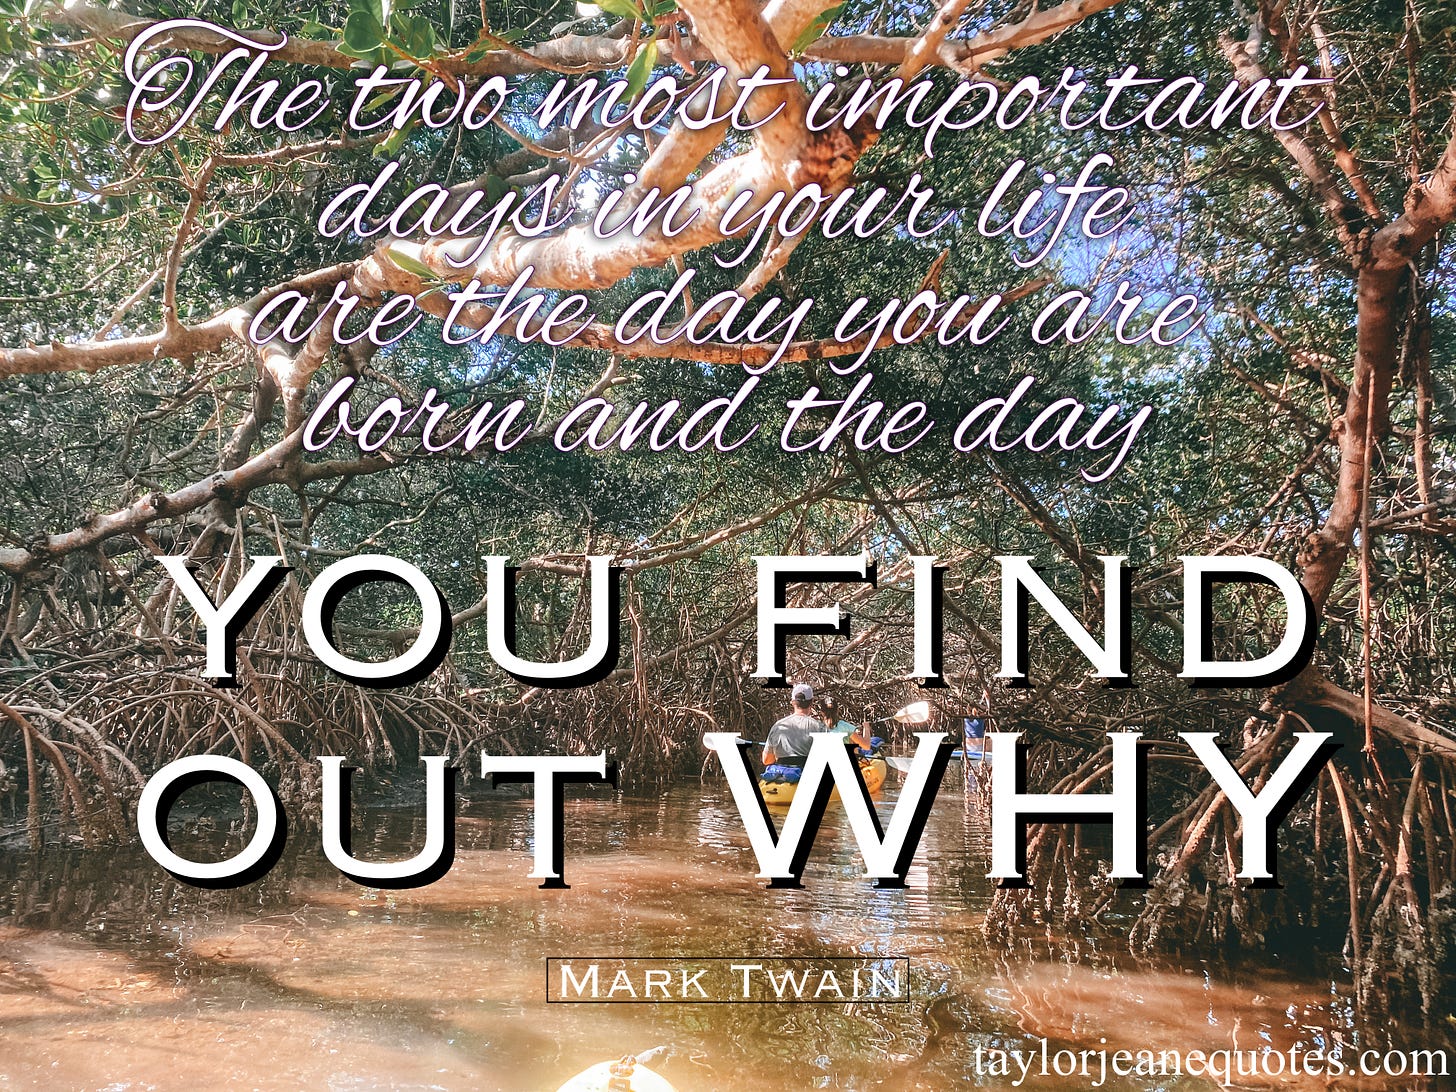 taylor jeane quotes, quote of the day, motivational quotes, inspirational quotes, positive quotes, uplifting quotes, life quotes, mark twain quotes, quotes, mark twain